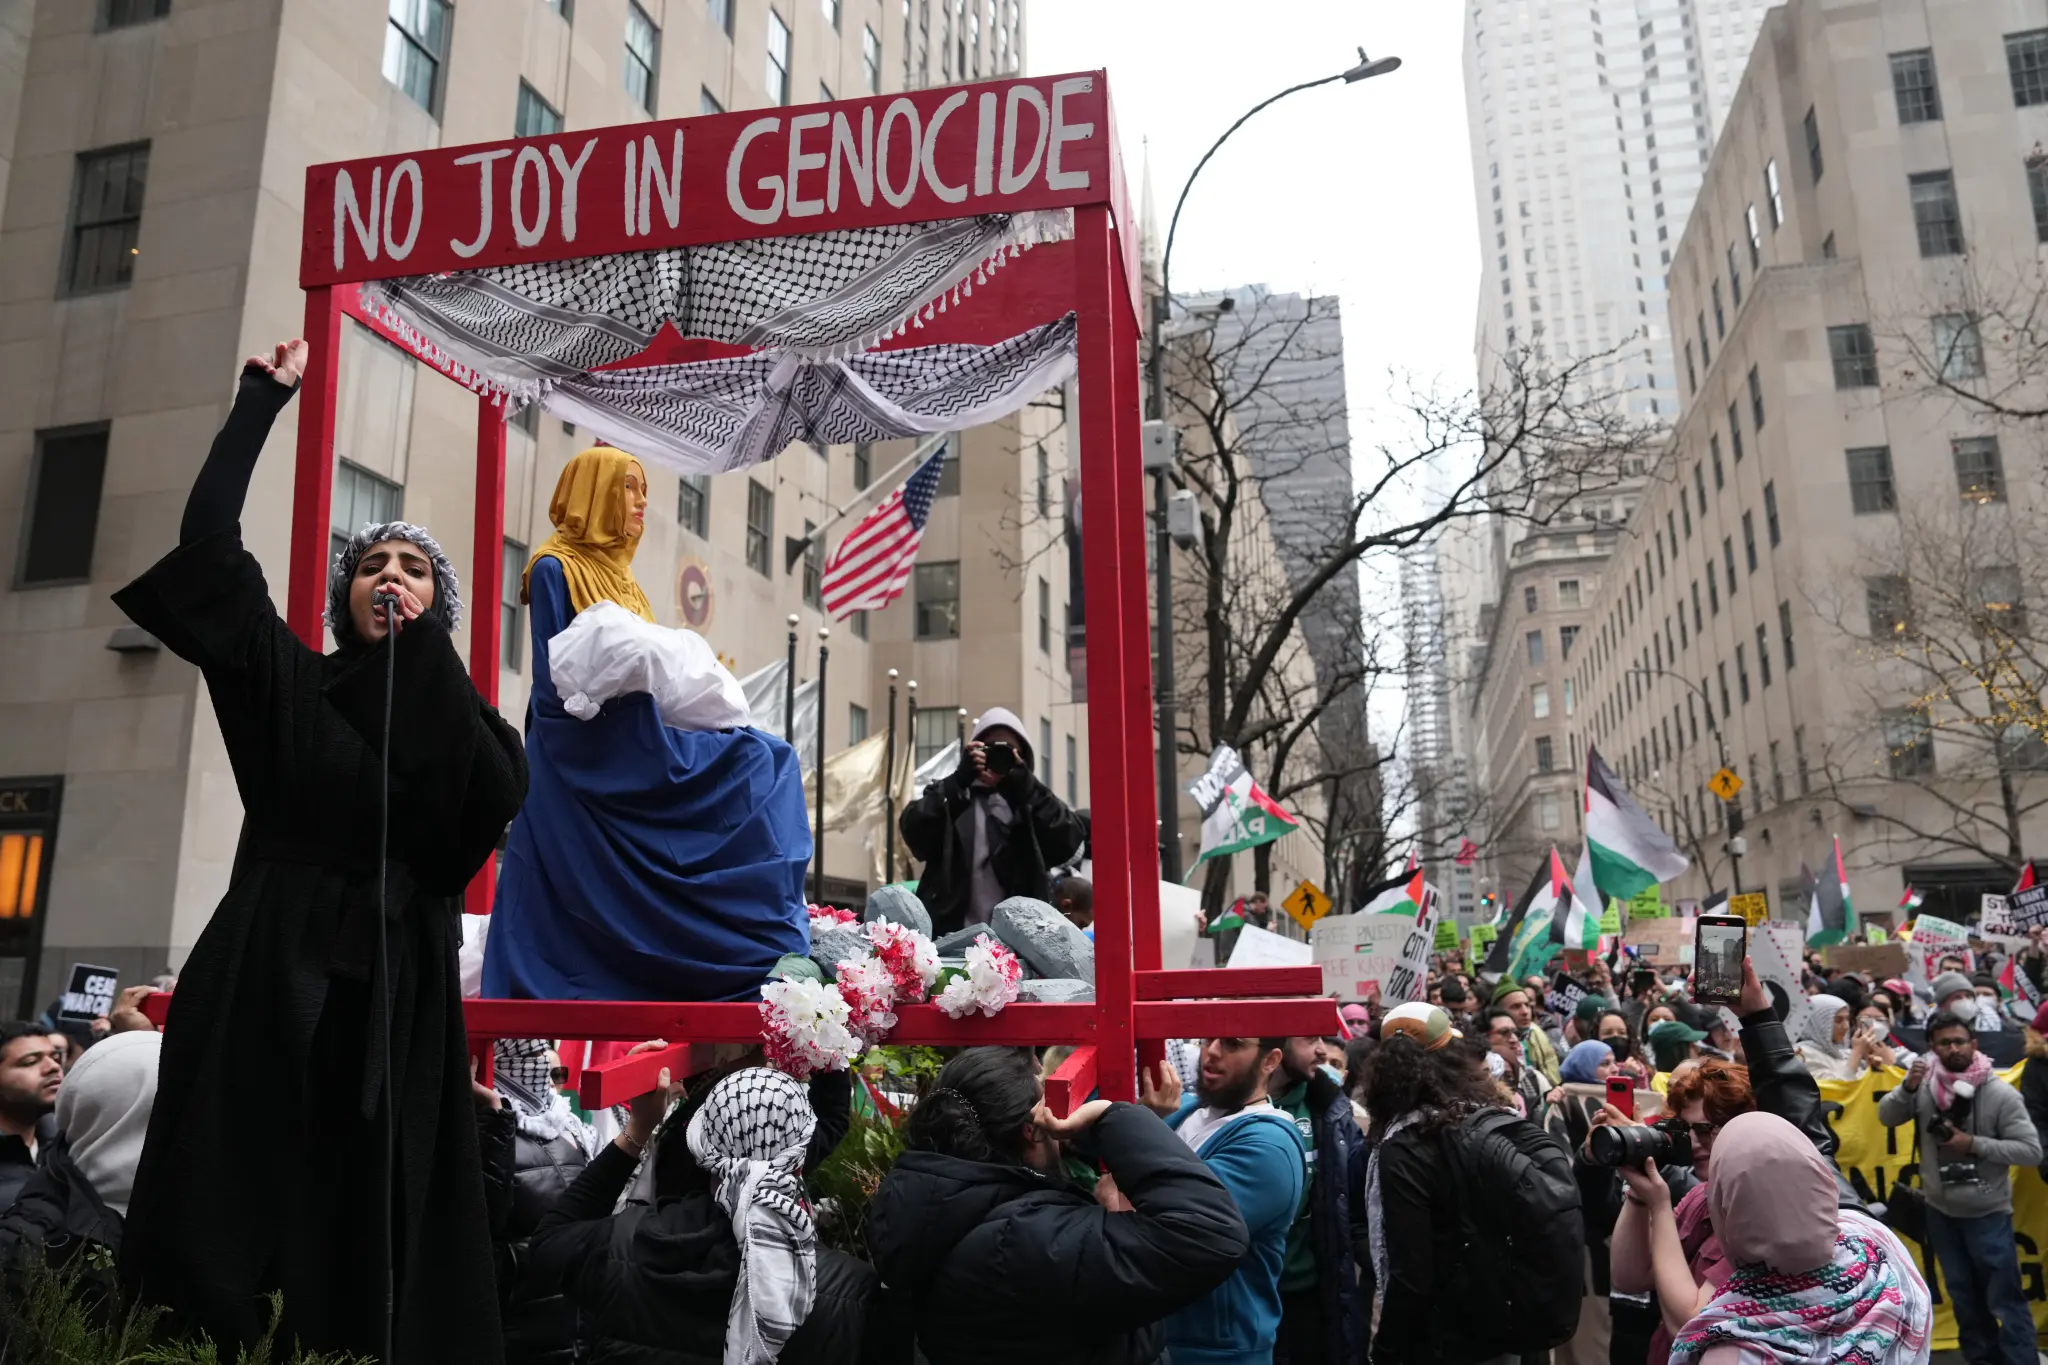 A pro-Palestine mob in New York City declared that “Christmas is canceled” in protest of the Israel-Hamas war, leading to vandalism and multiple arrests.